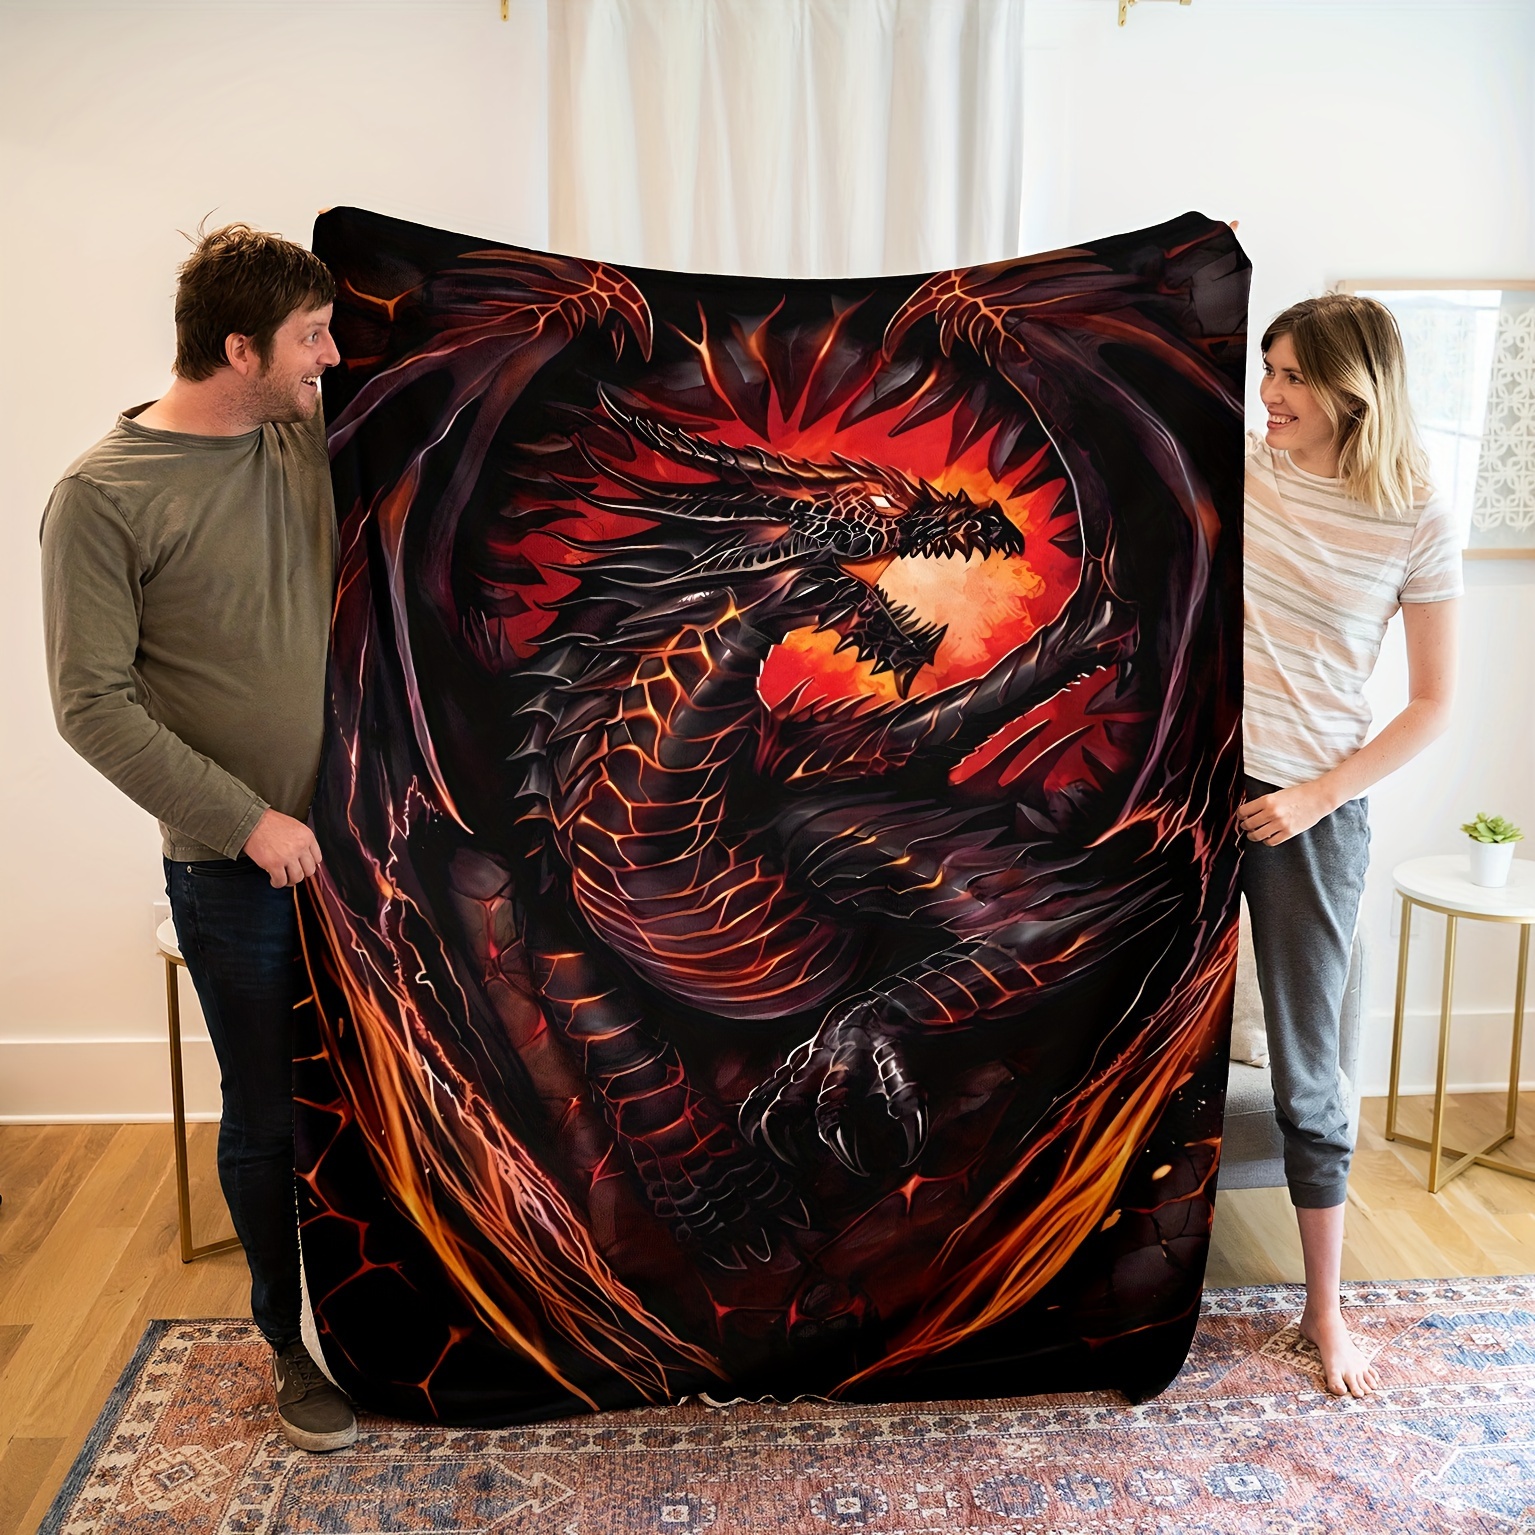 

1pc Dragon Pattern Print Blanket, Flannel Blanket, Soft Warm Throw Blanket Multi-purpose Blanket For Couch Sofa Bed Office Camping Travelling